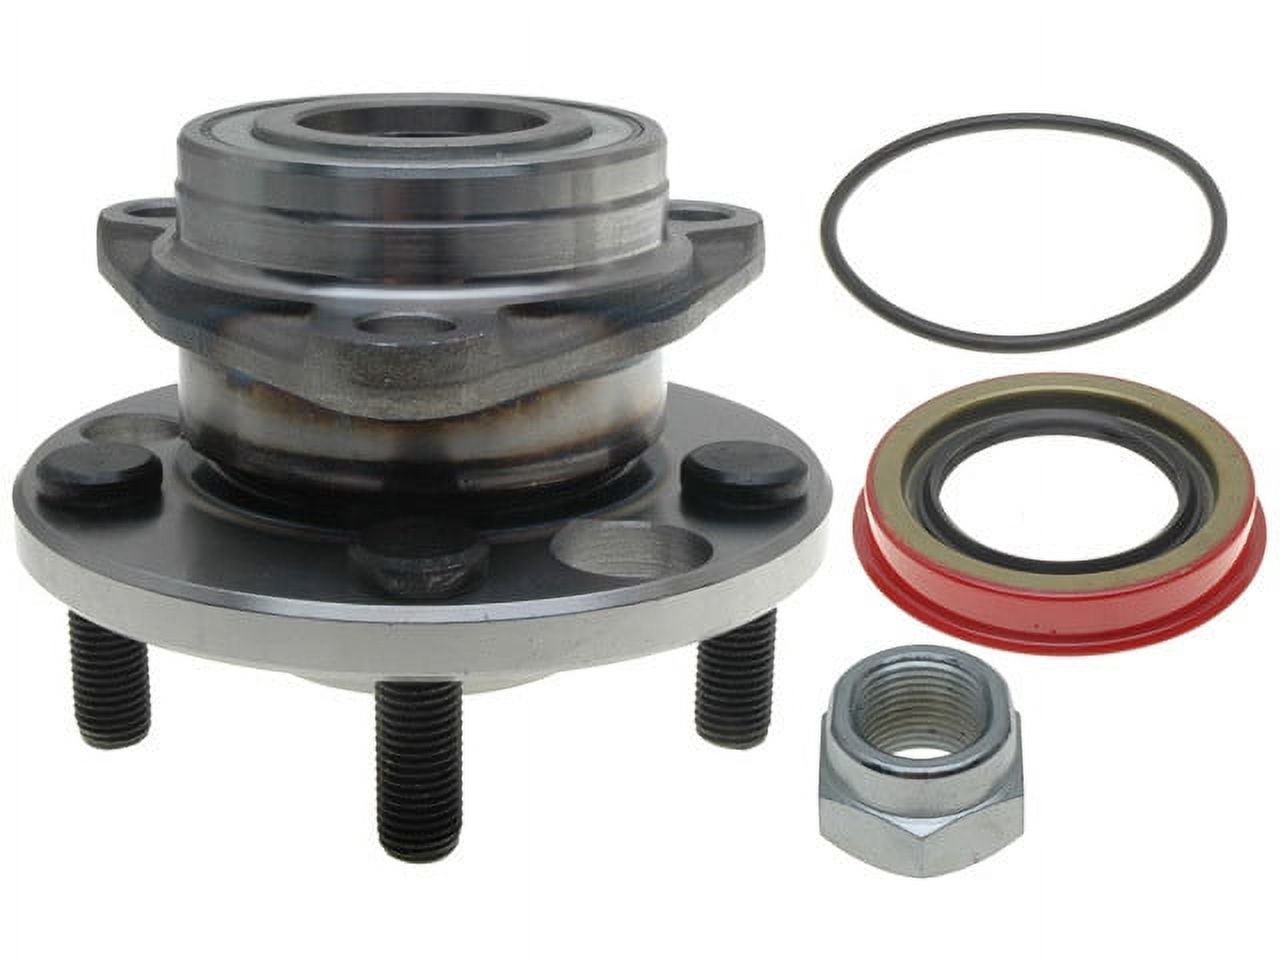 Raybestos Brakes Axle Bearing and Hub Assembly Repair Kit P/N:713017K Fits select: 1984-2005 CHEVROLET CAVALIER, 1995-2005 PONTIAC SUNFIRE - image 4 of 5